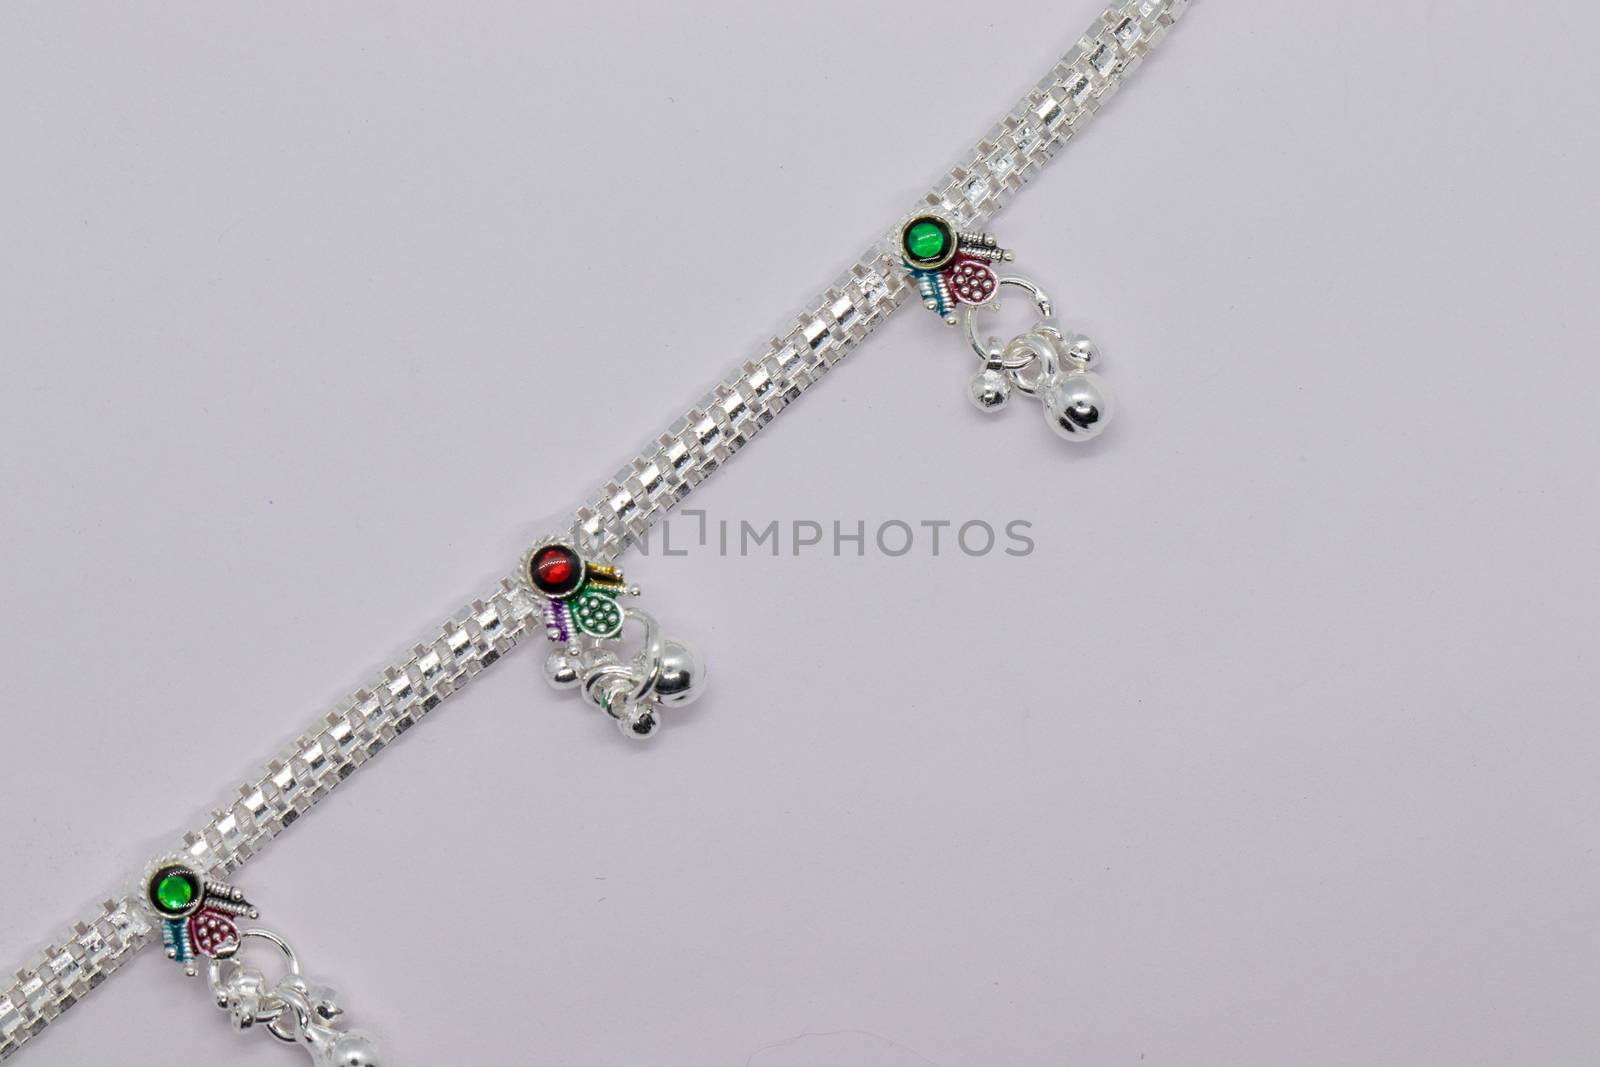 one silver leg chain with Anklets for design (anklet) by 9500102400